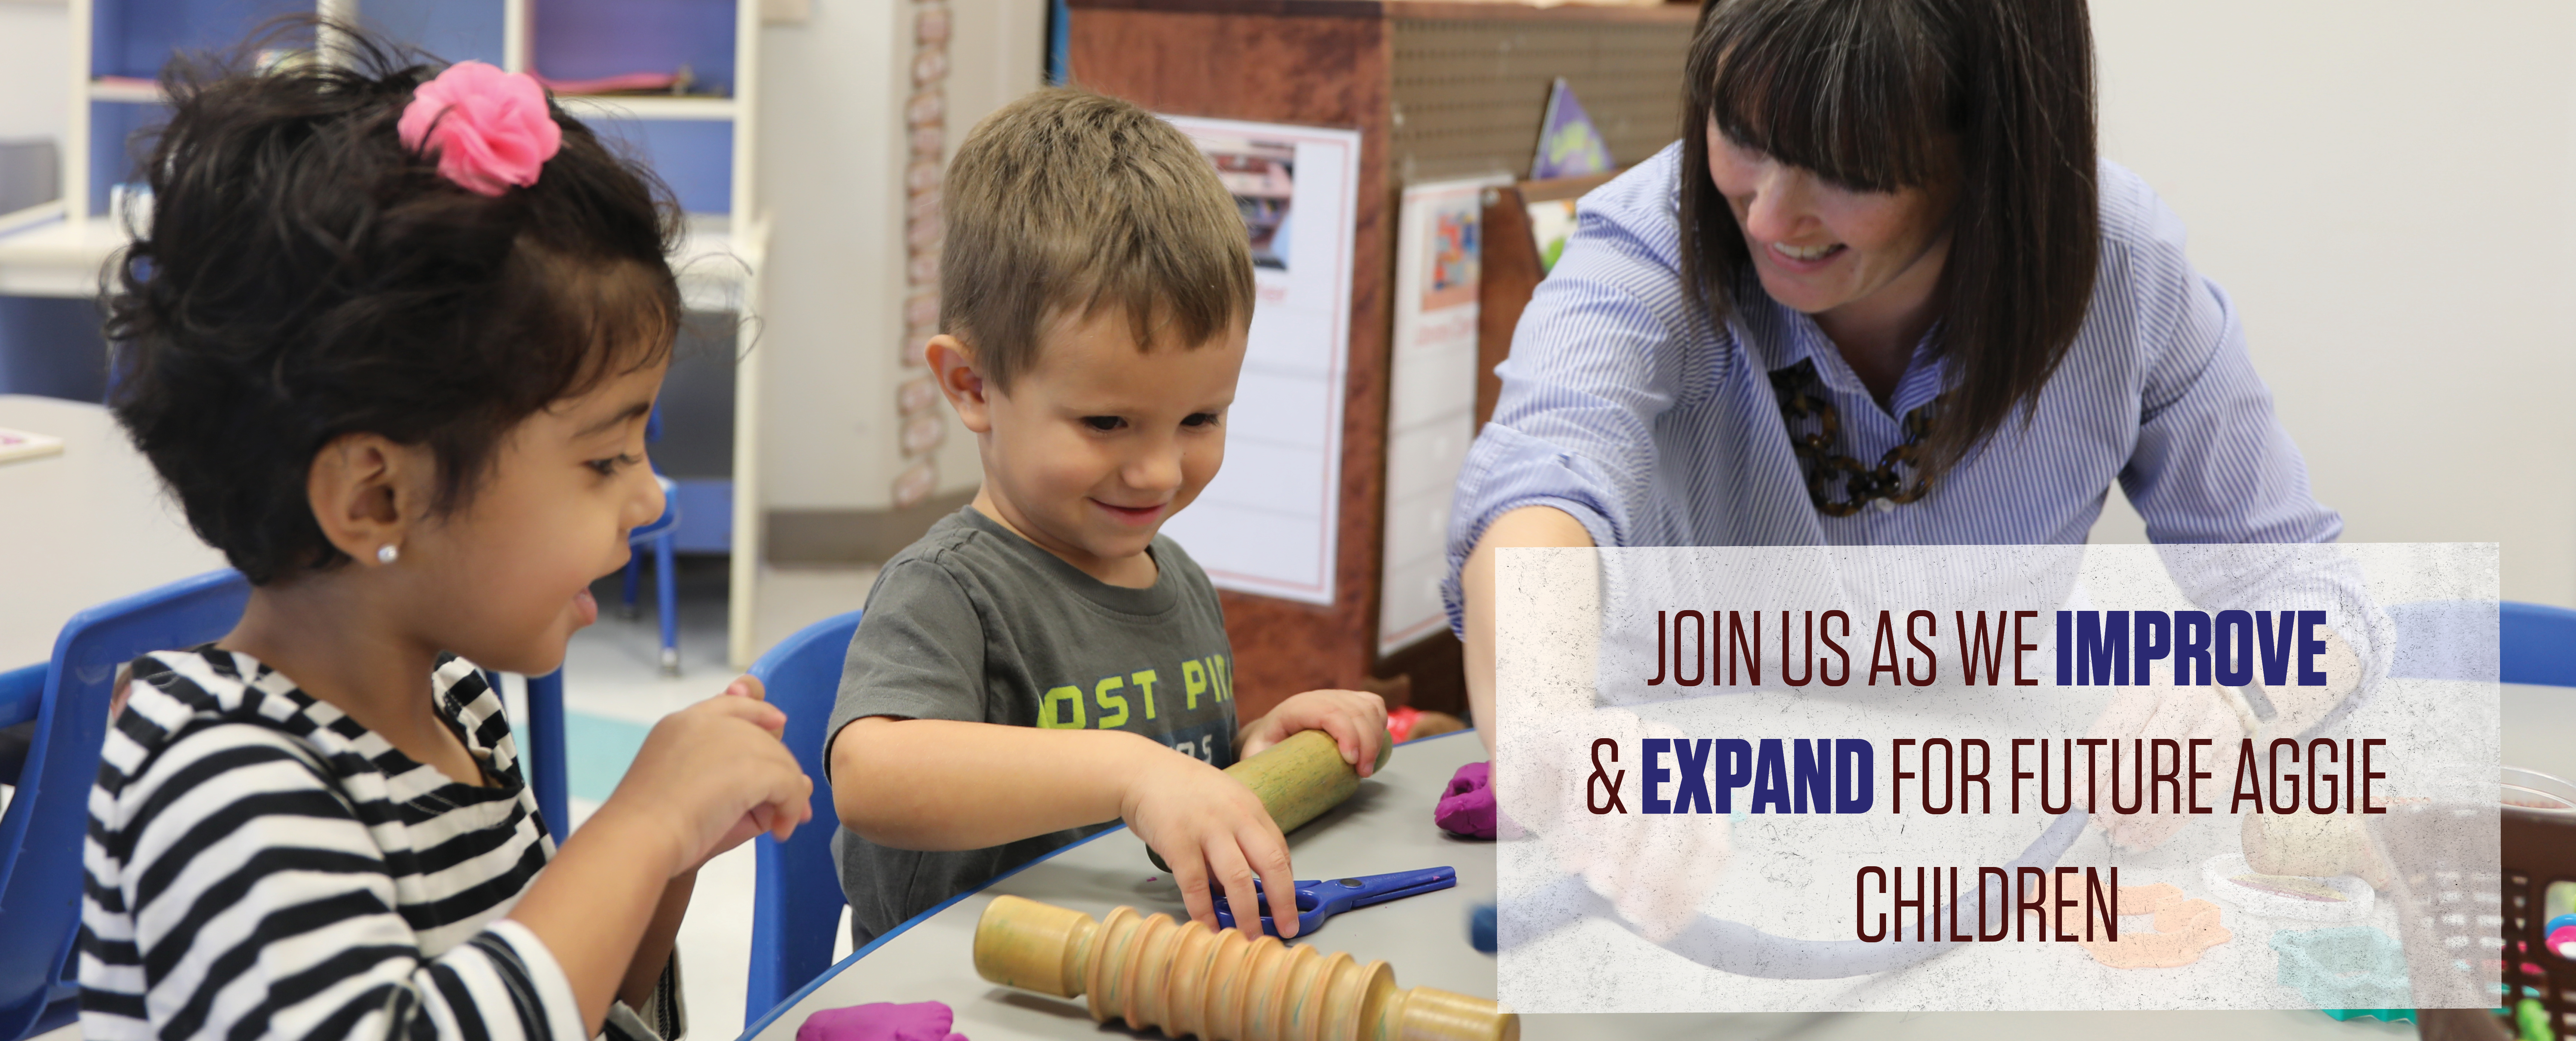 join us as we improve and expand for future aggie children